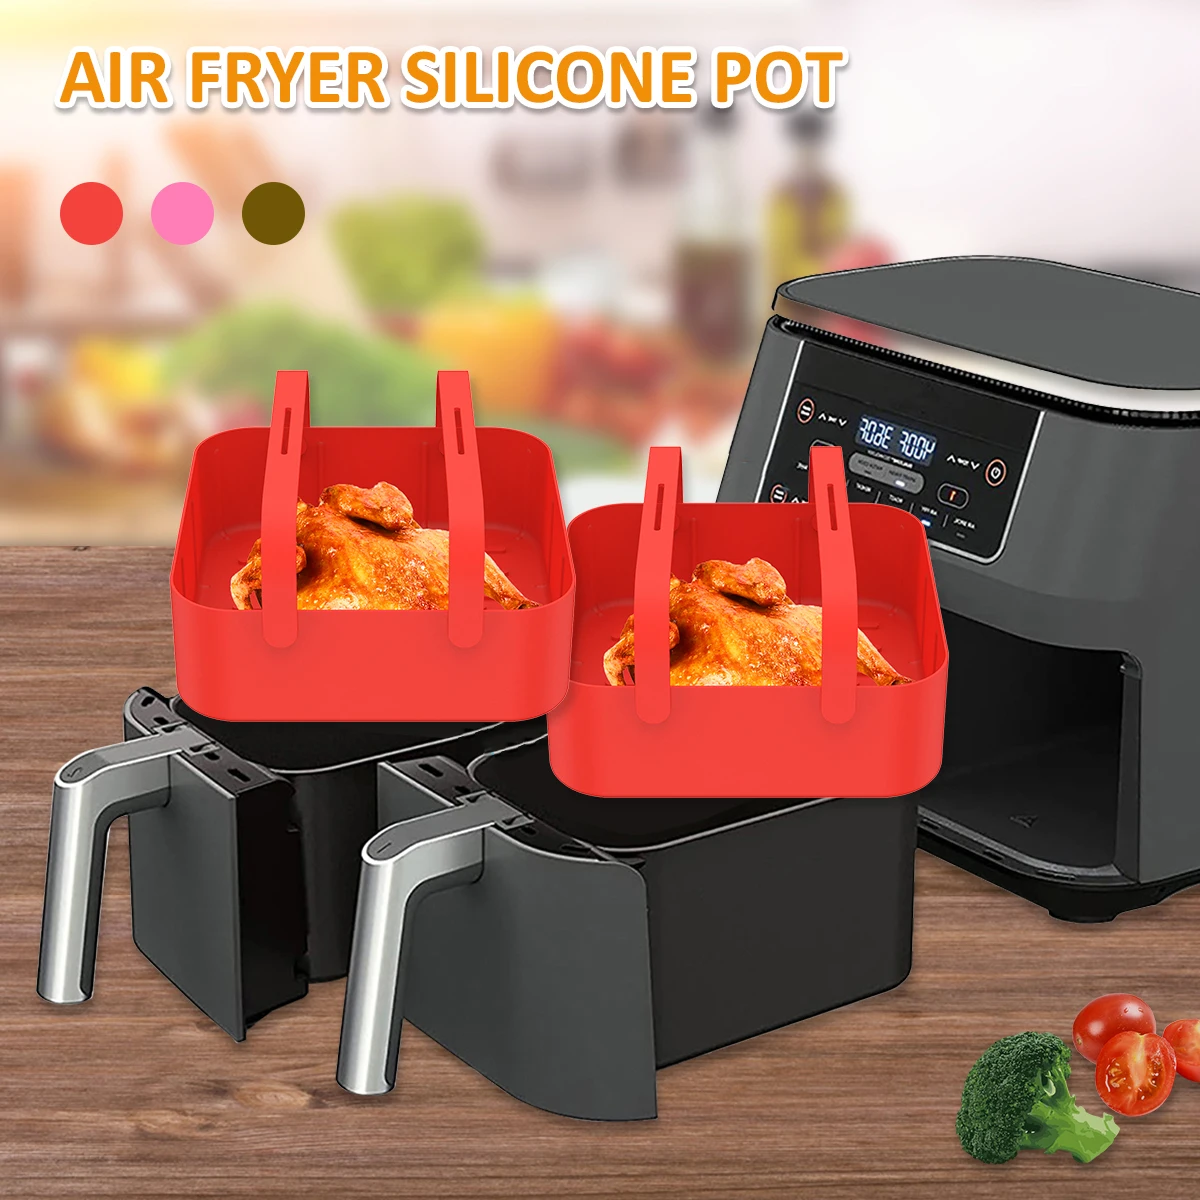 

New2Pcs Air Fryer Silicone Pot with Handle Reusable Air Fryer Liner Heat Resistant Air Fryer Silicone Basket 7 inch Square